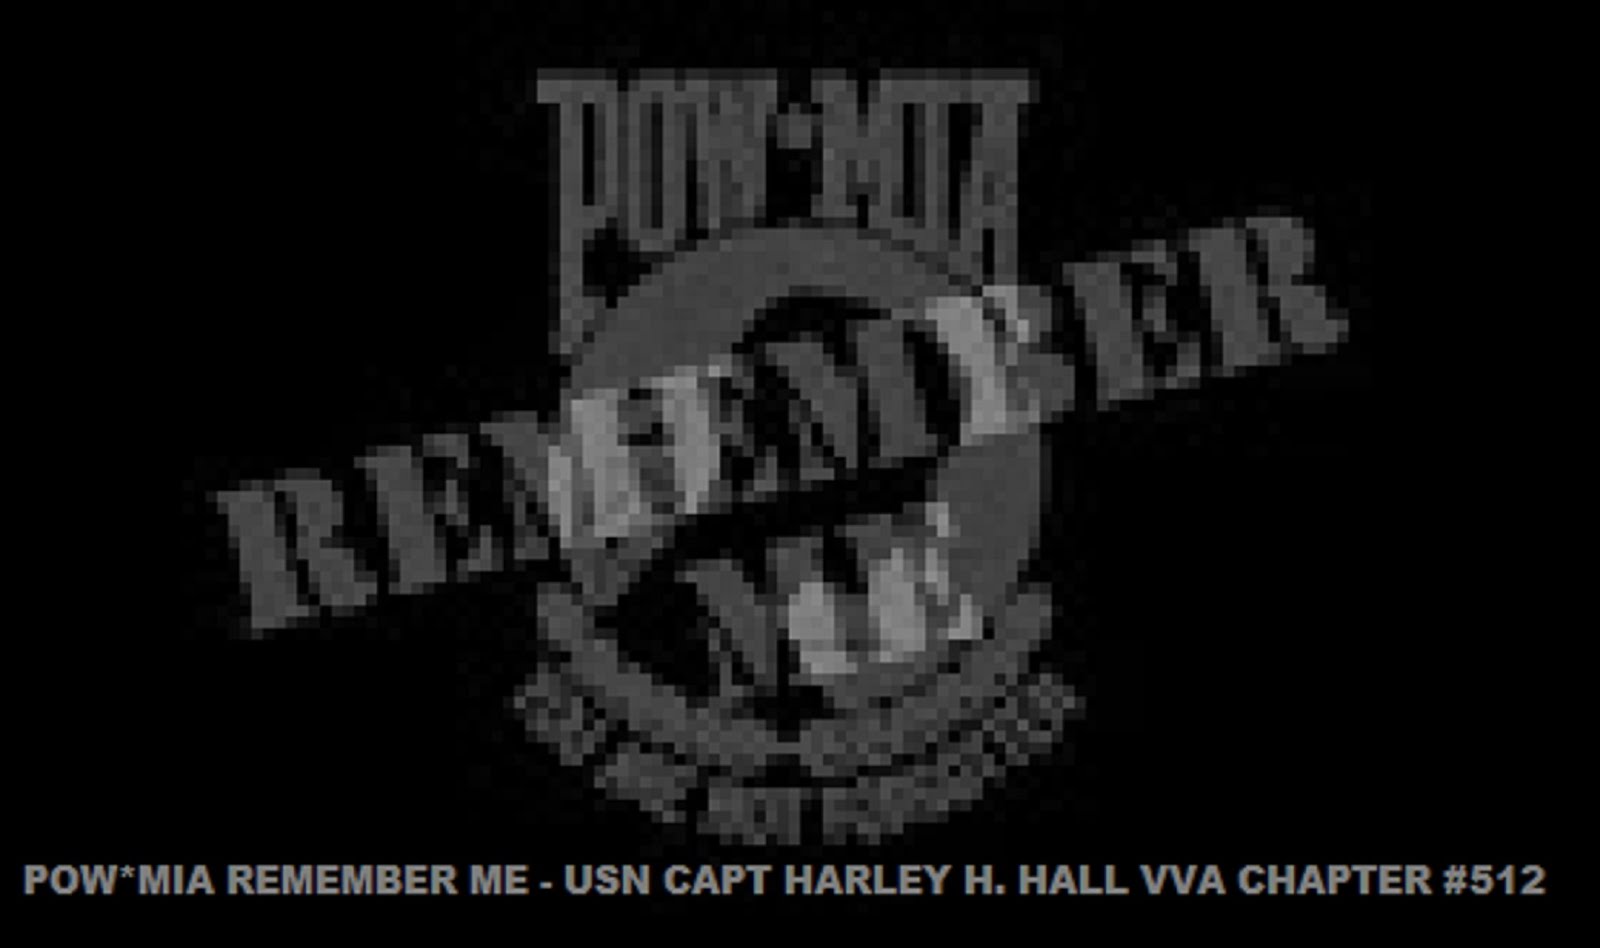 POW*MIA REMEMBER ME - USN CAPT HARLEY H HALL MY ADOPTED POW*MIA Through Operation Just Cause